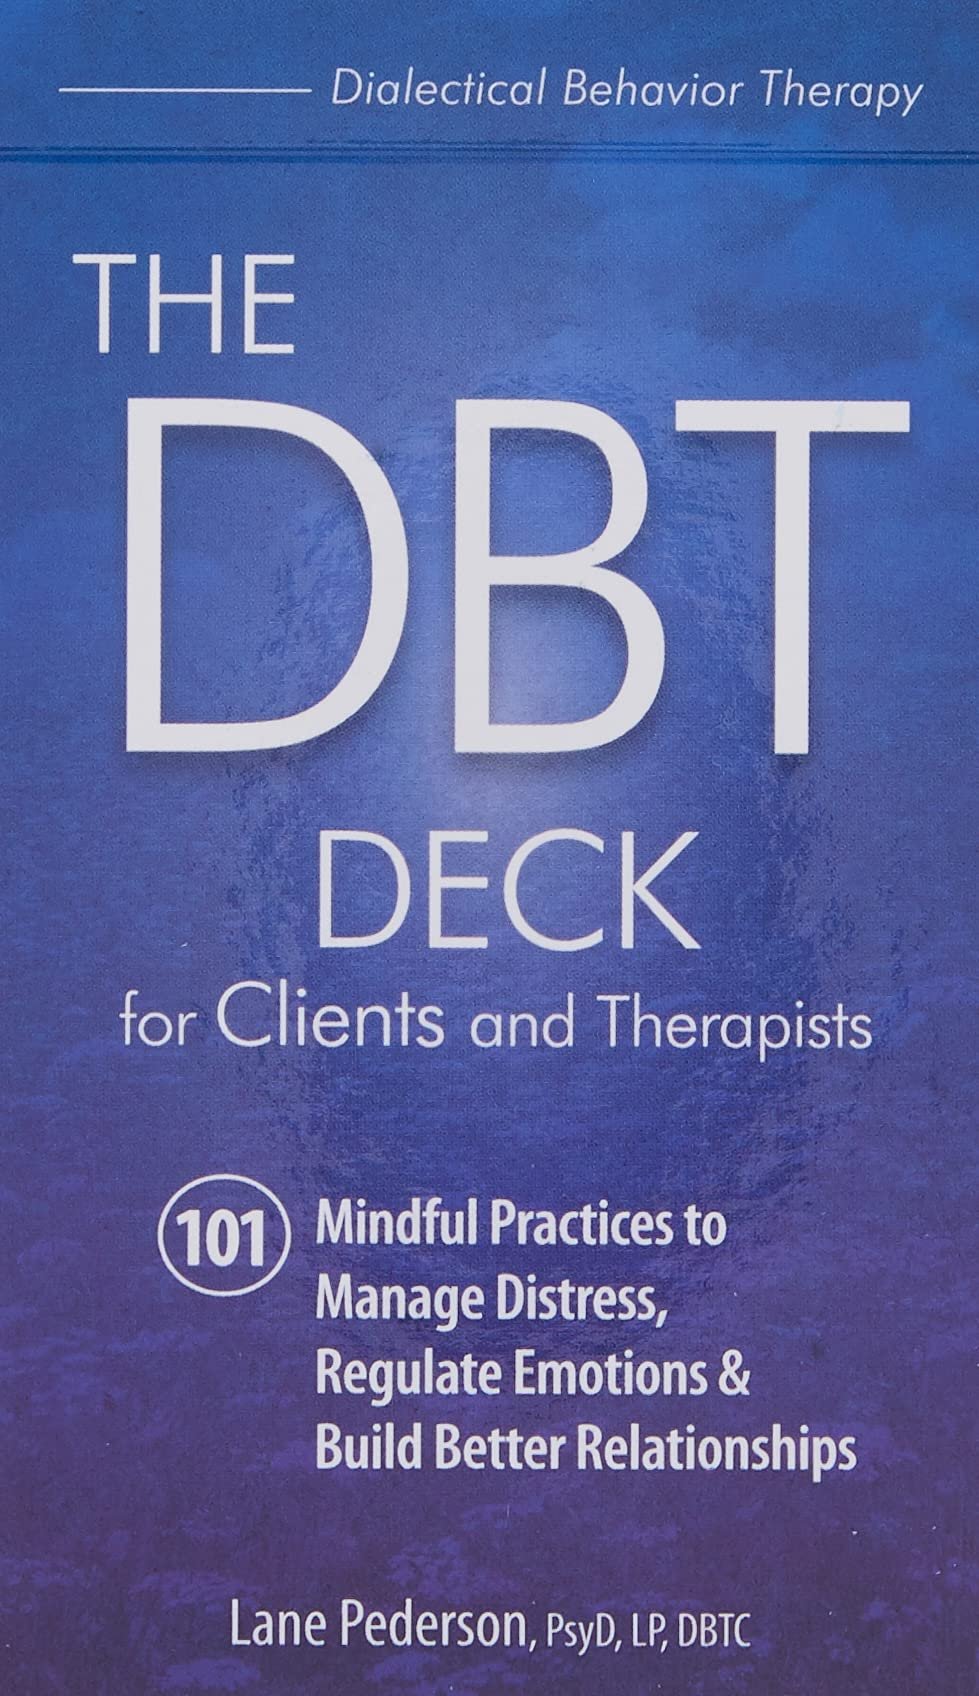 The DBT Deck for Clients and Therapists: 101 Mindful Practices to Manage Distress, Regulate Emotions & Build Better Relationships by Lane Pederson